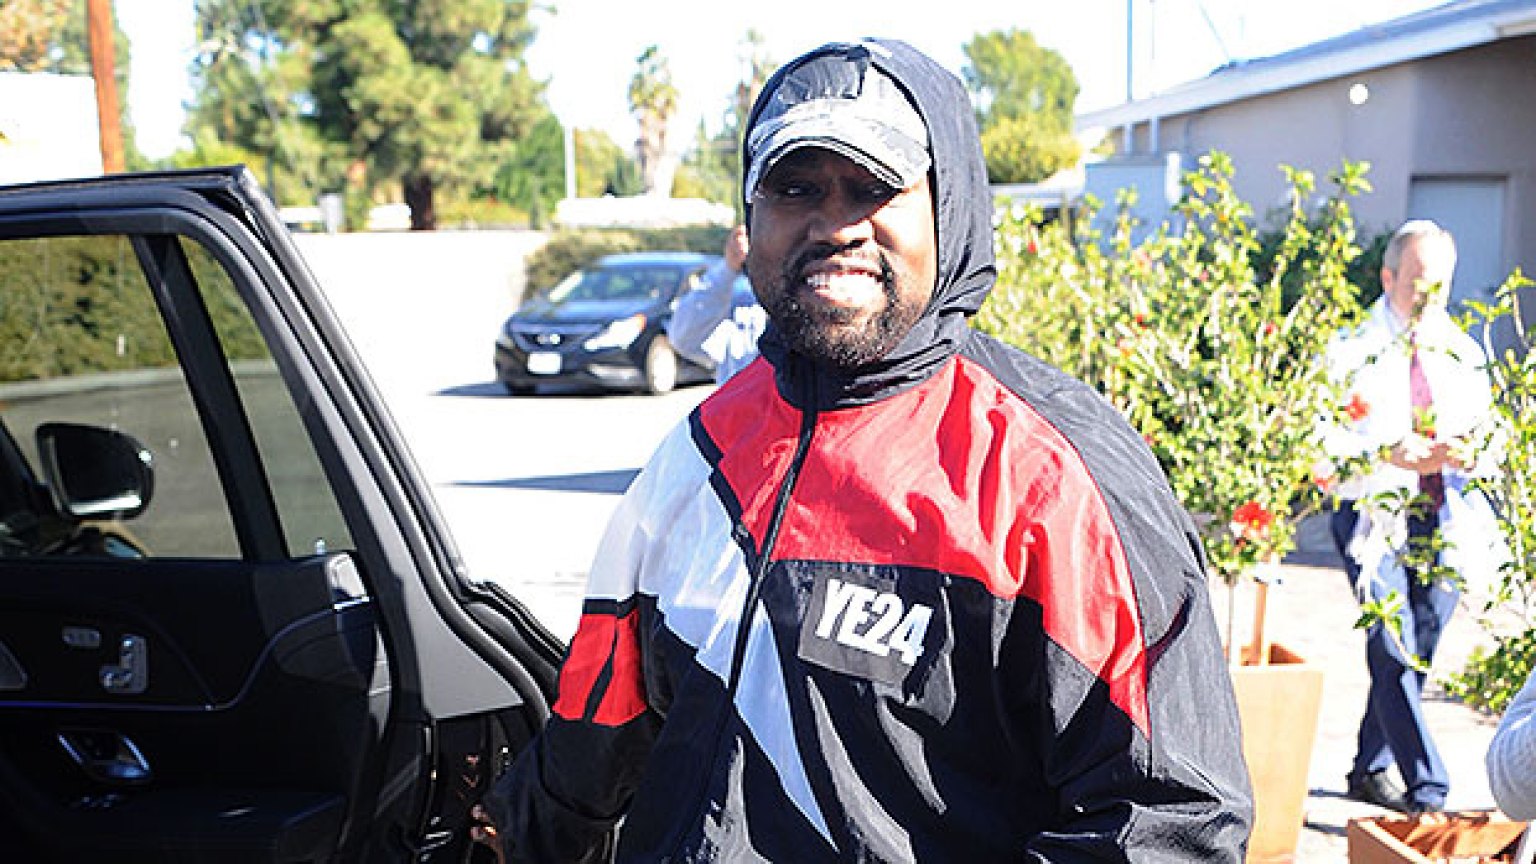 Kanye West Wearing ‘ye24 Campaign Gear Photos Hollywood Life 8550